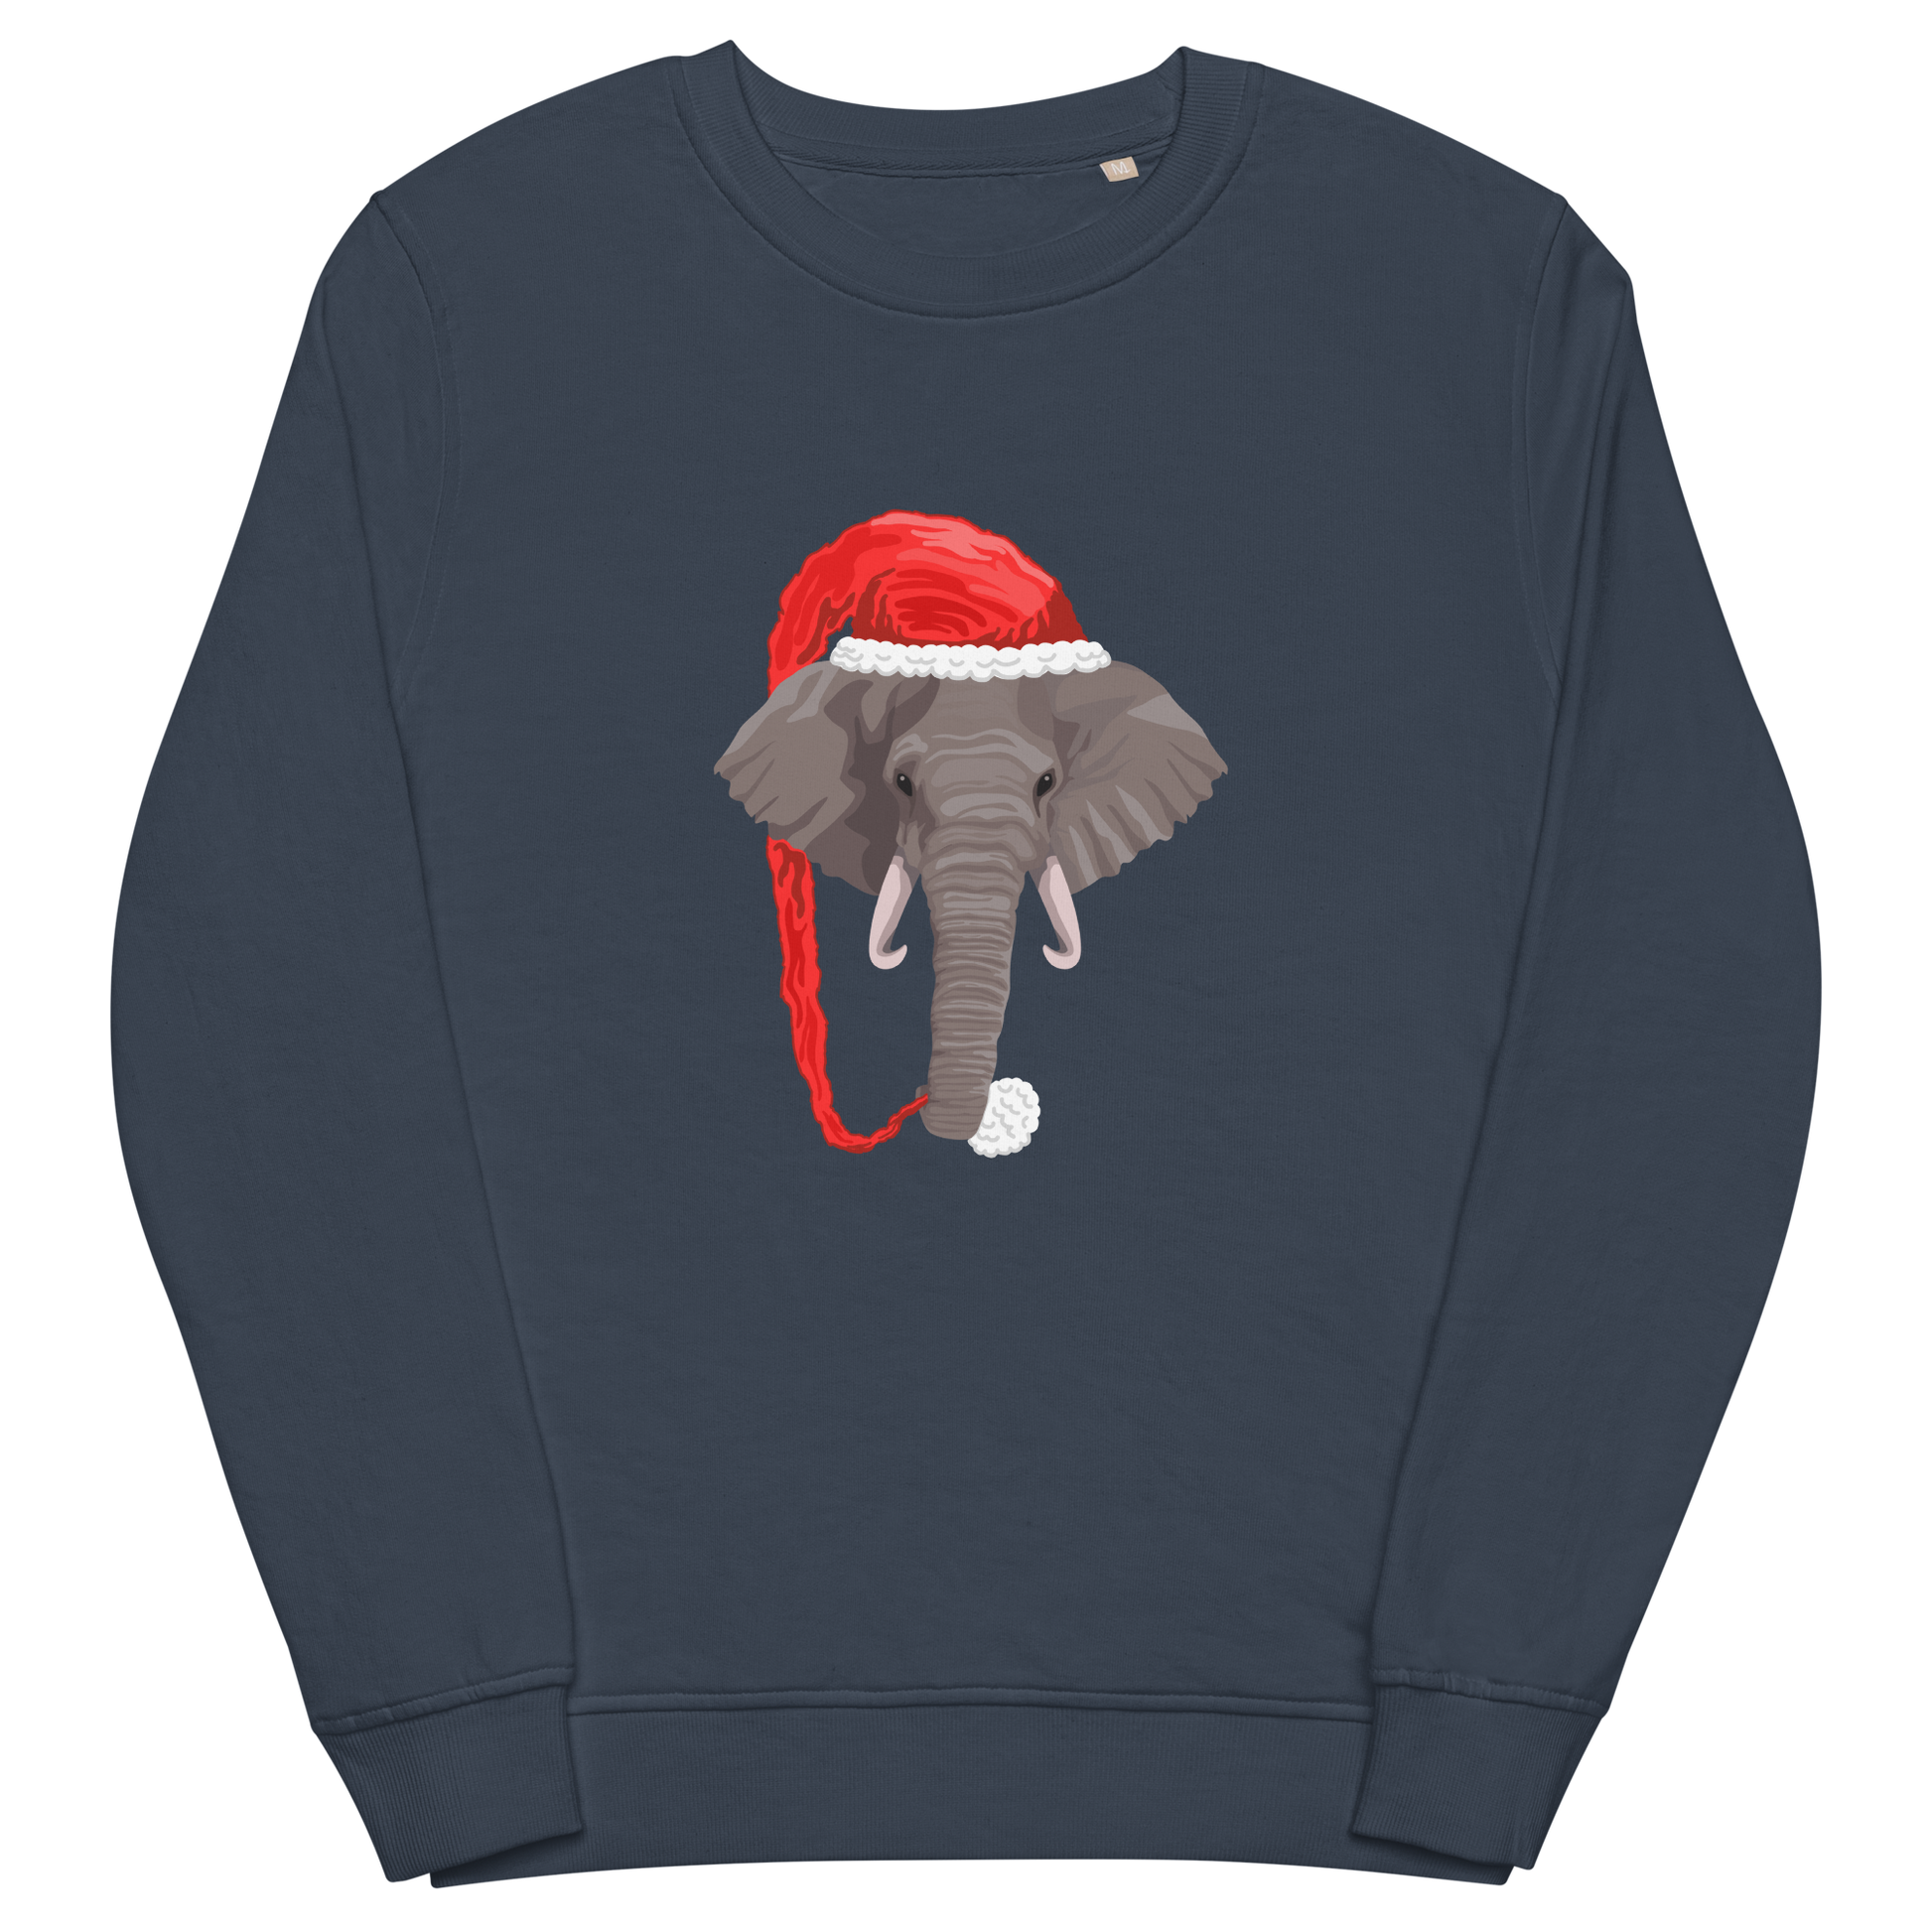 French Navy Organic Christmas Elephant Sweatshirt featuring a delight Elephant Wearing an Elf Hat graphic on the chest - Funny Christmas Graphic Elephant Sweatshirts - Boozy Fox